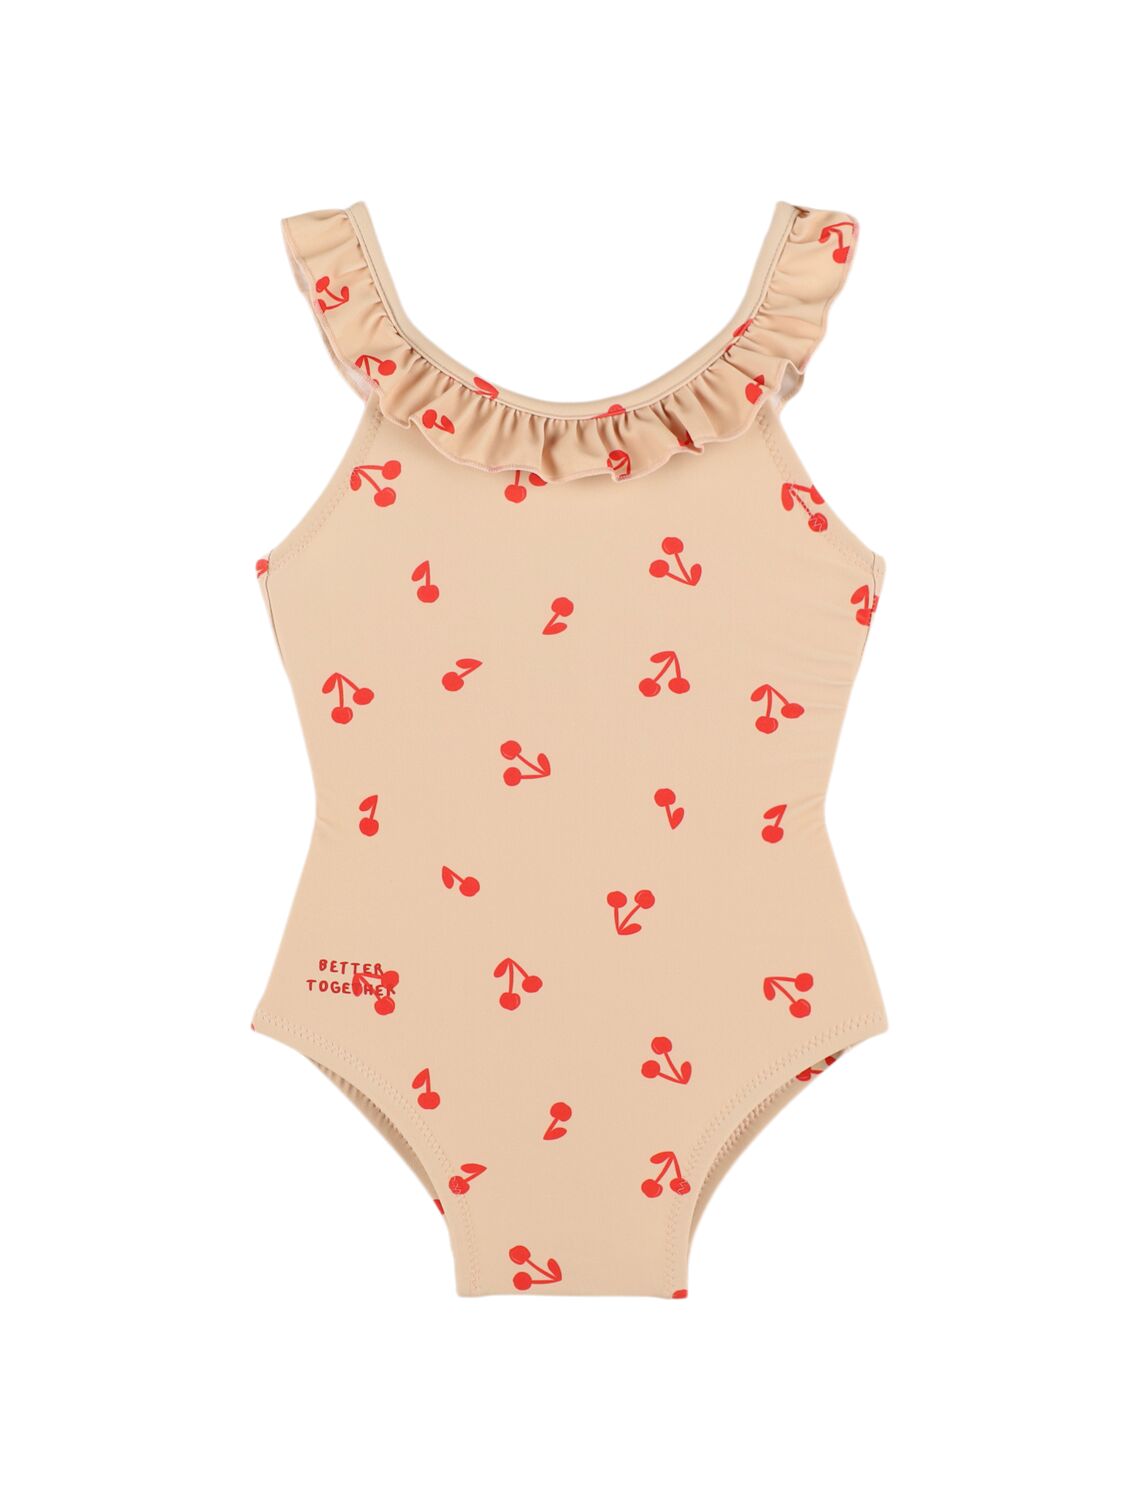 Liewood Kids' Printed Recycled Nylon Onepiece Swimsuit In 粉色